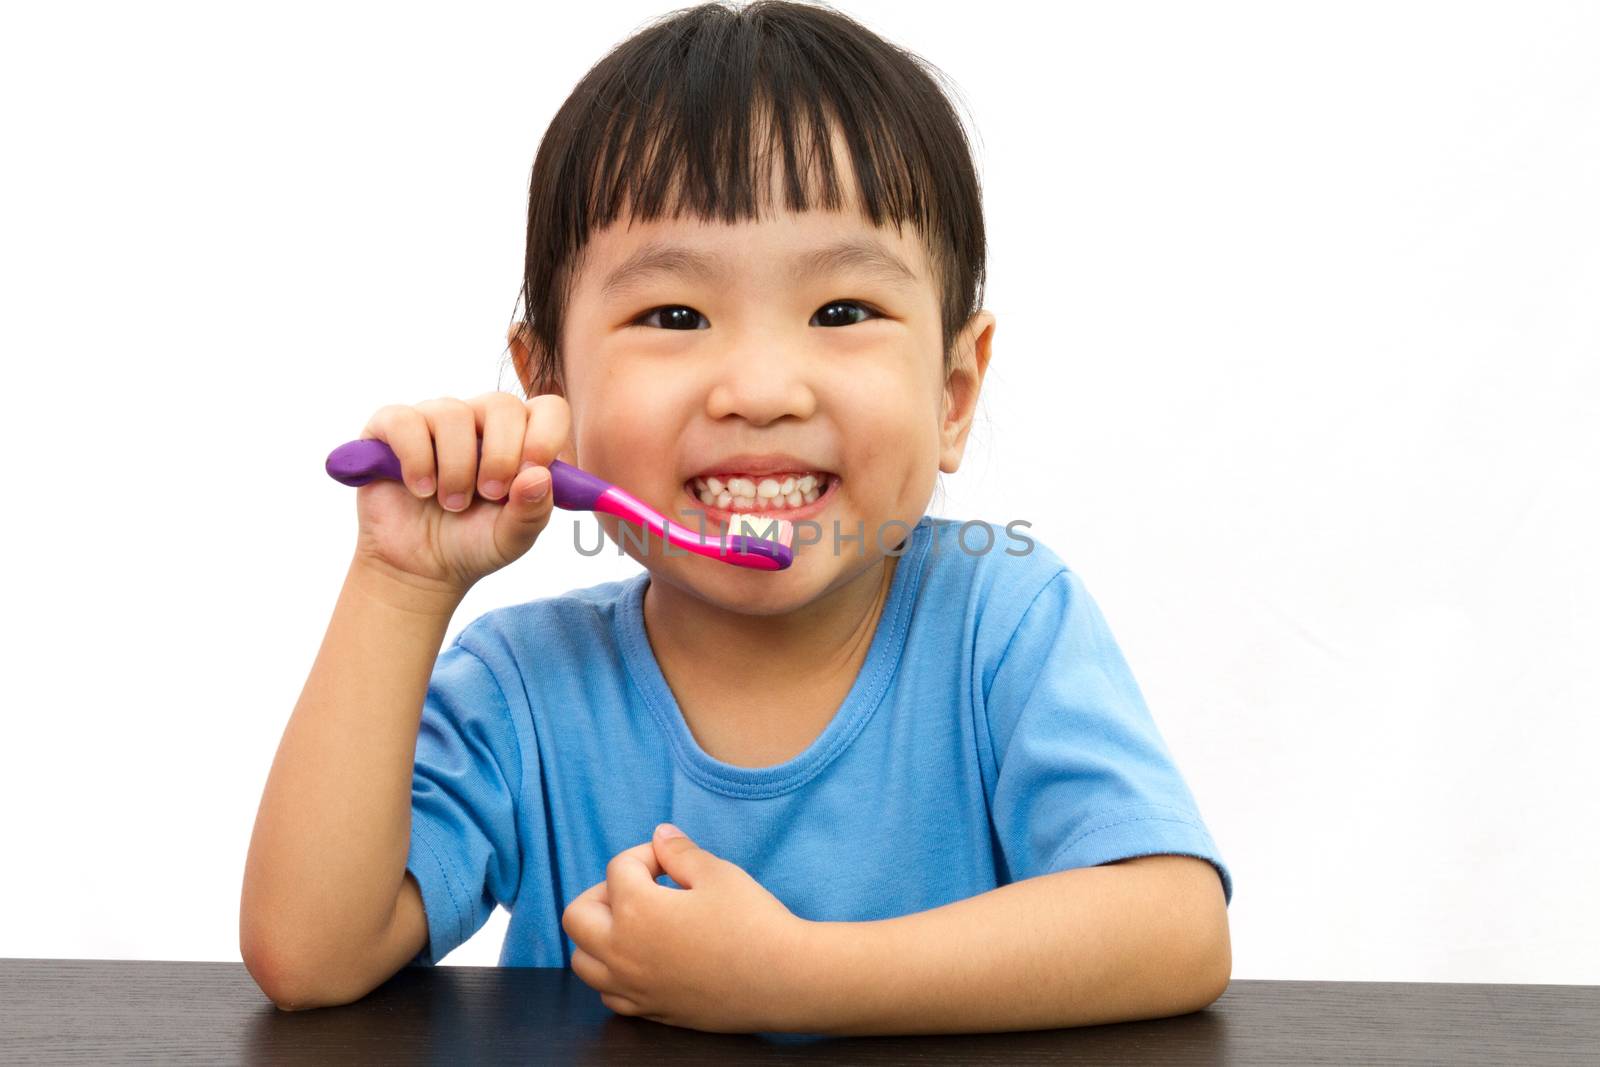 Chinese little girl brushing teeth in plain white isolated background.